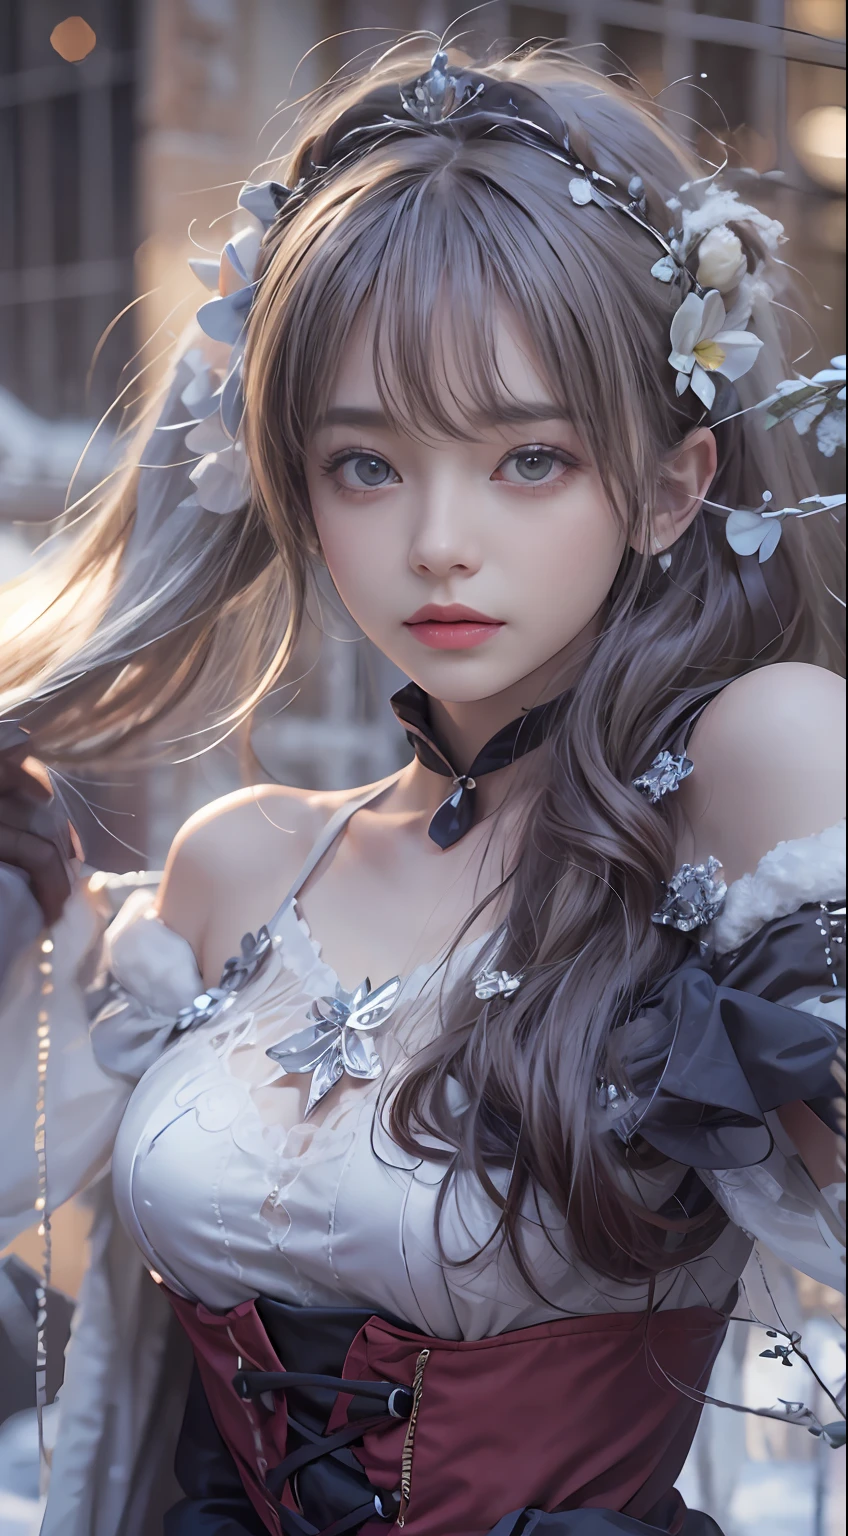 （8K， RAW photos， best qualtiy， tmasterpiece：1.2），（realisticlying， photograph realistic：1.4)，Hide your face with sadness，
Lolita costume，Lace， Aerith Gainsborough， The upper part of the body， undergarments，exposed bare shoulders， do lado de fora， (outside，Covered with snow，cloaks，) high high quality， Adobe Lightroom， highdetailskin， looking at viewert，